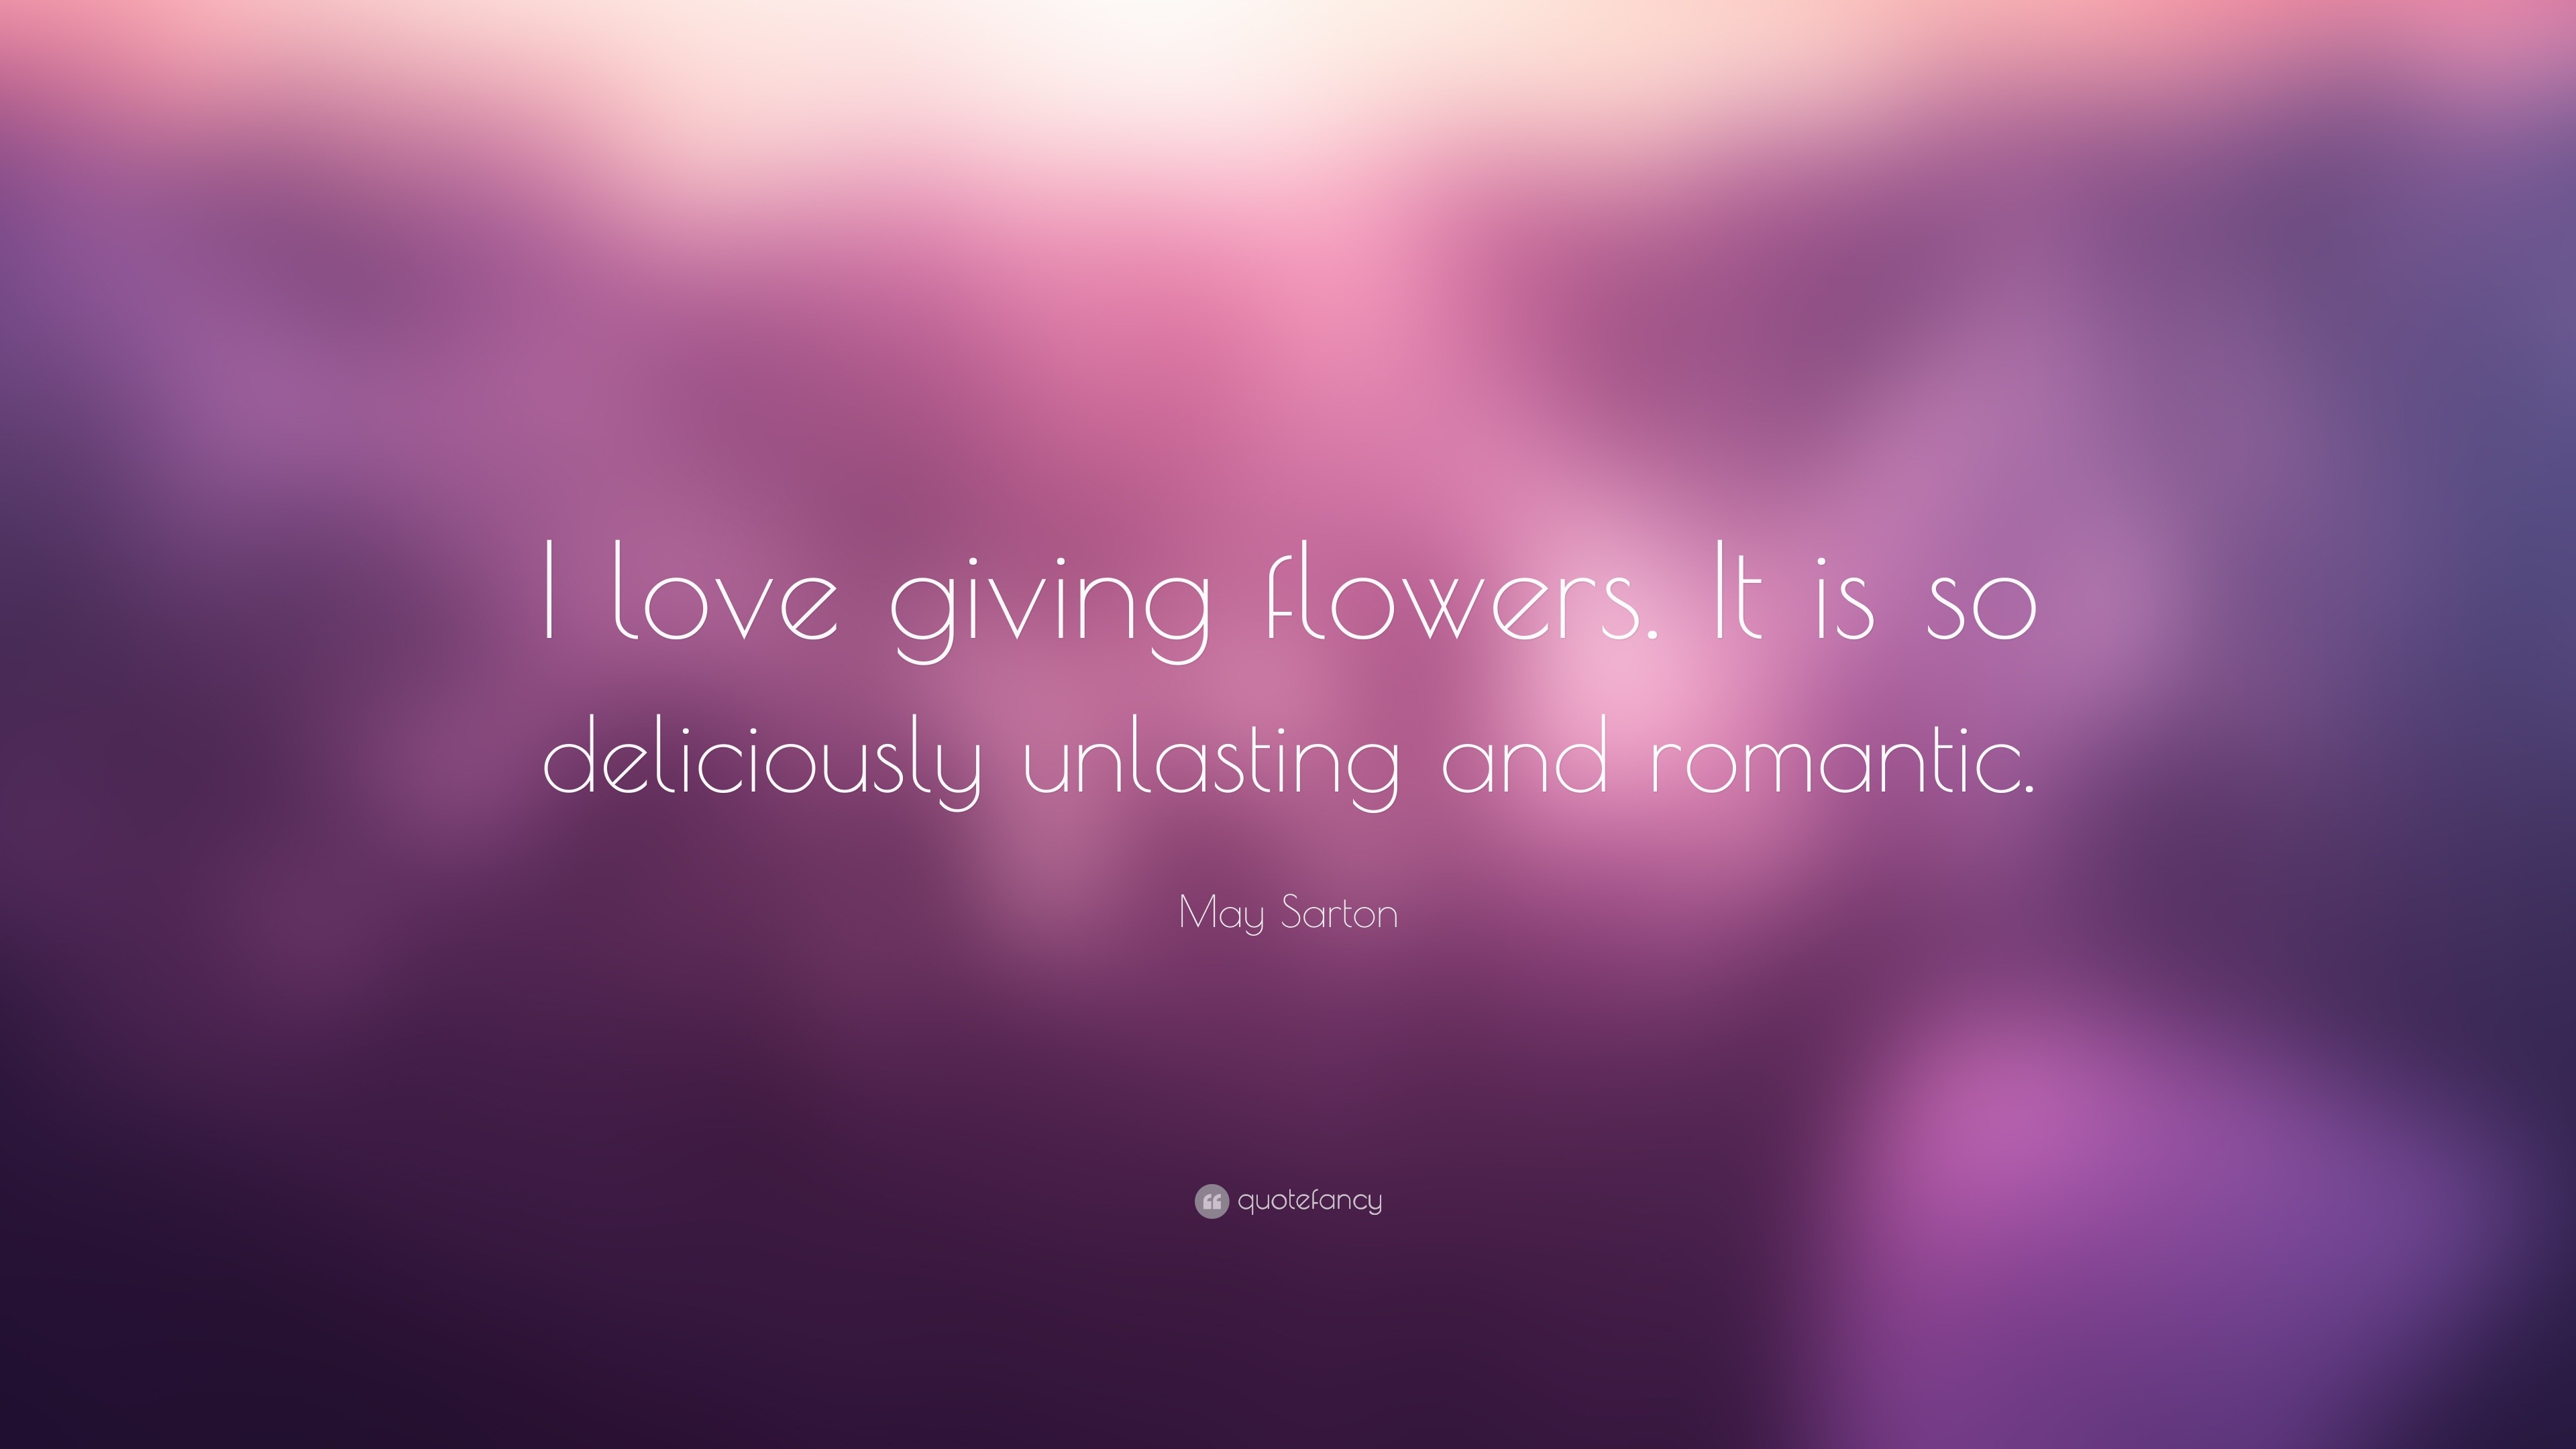 giving flowers quotes Famous giving flowers quotes Popular giving flowers quotes